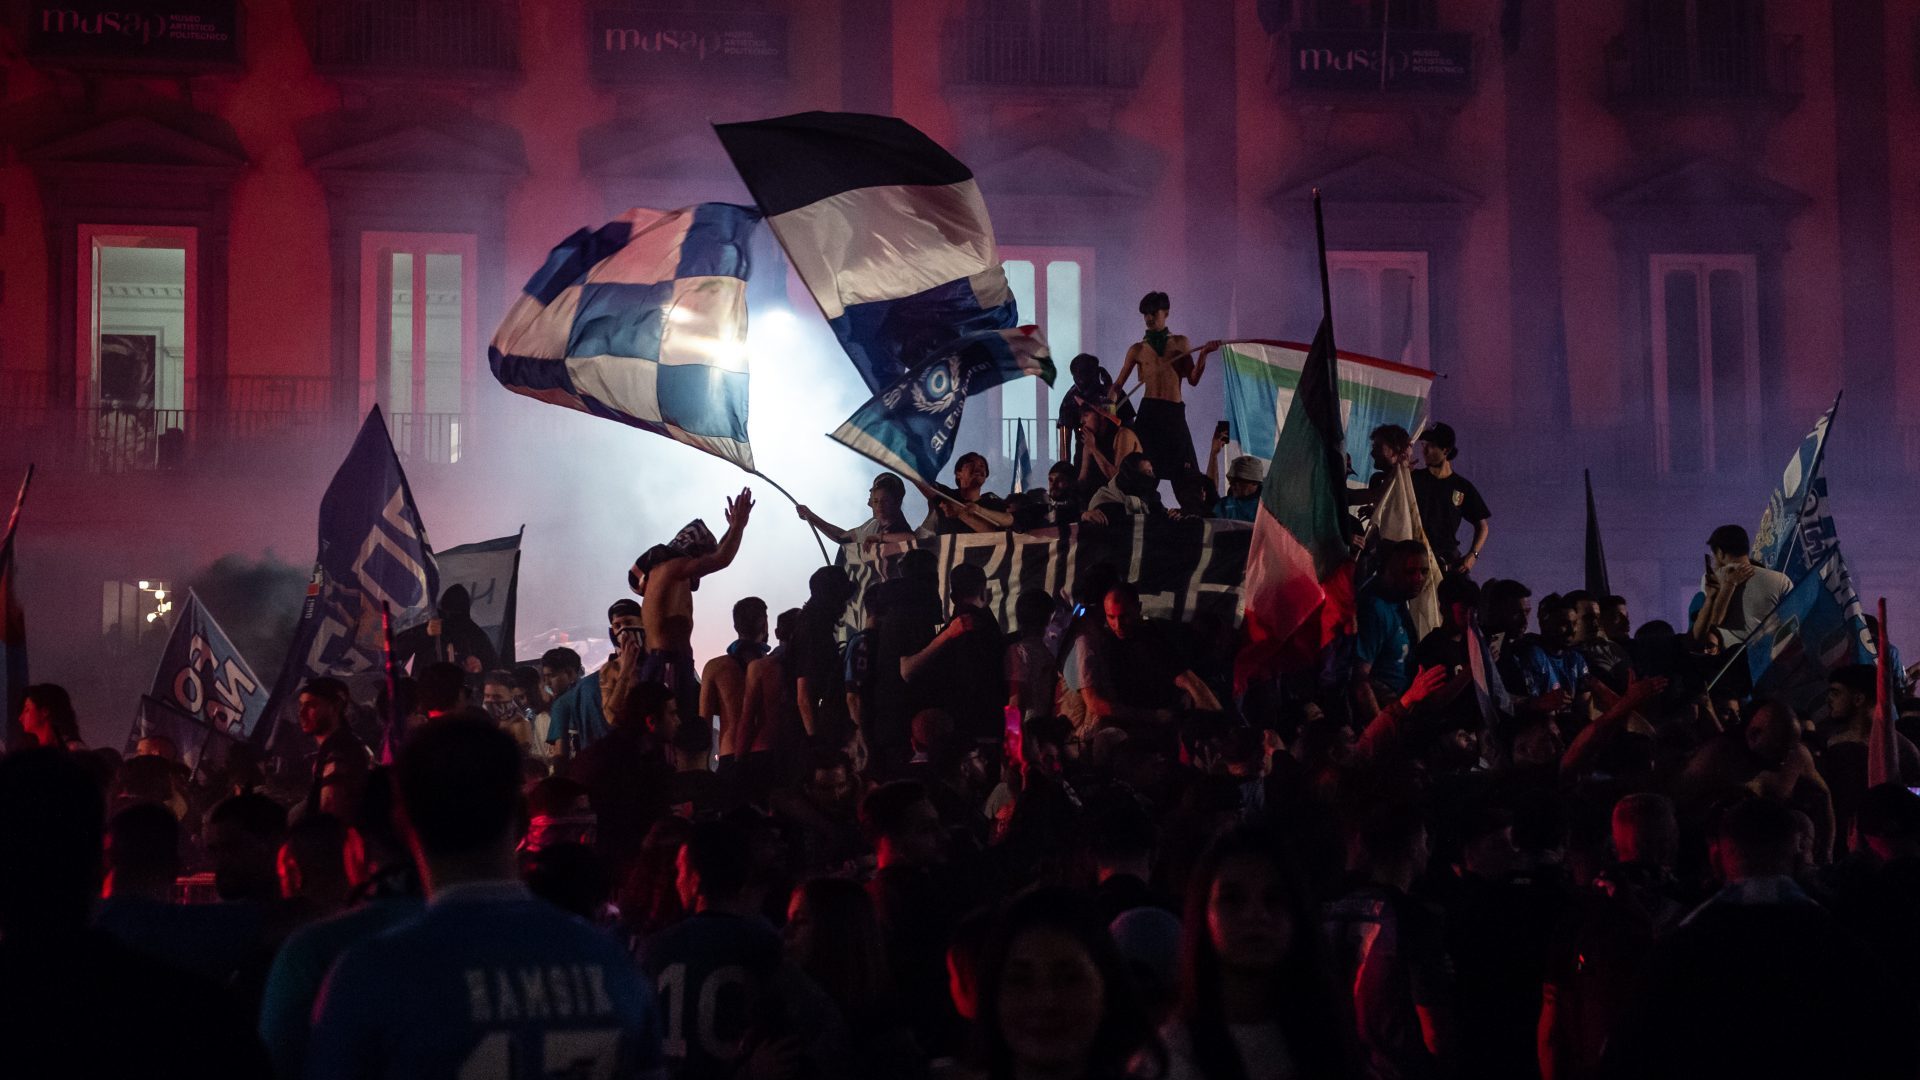 Napoli fans celebrate after winning the Serie A championship on May 04. Photo: Ivan Romano/Getty Images